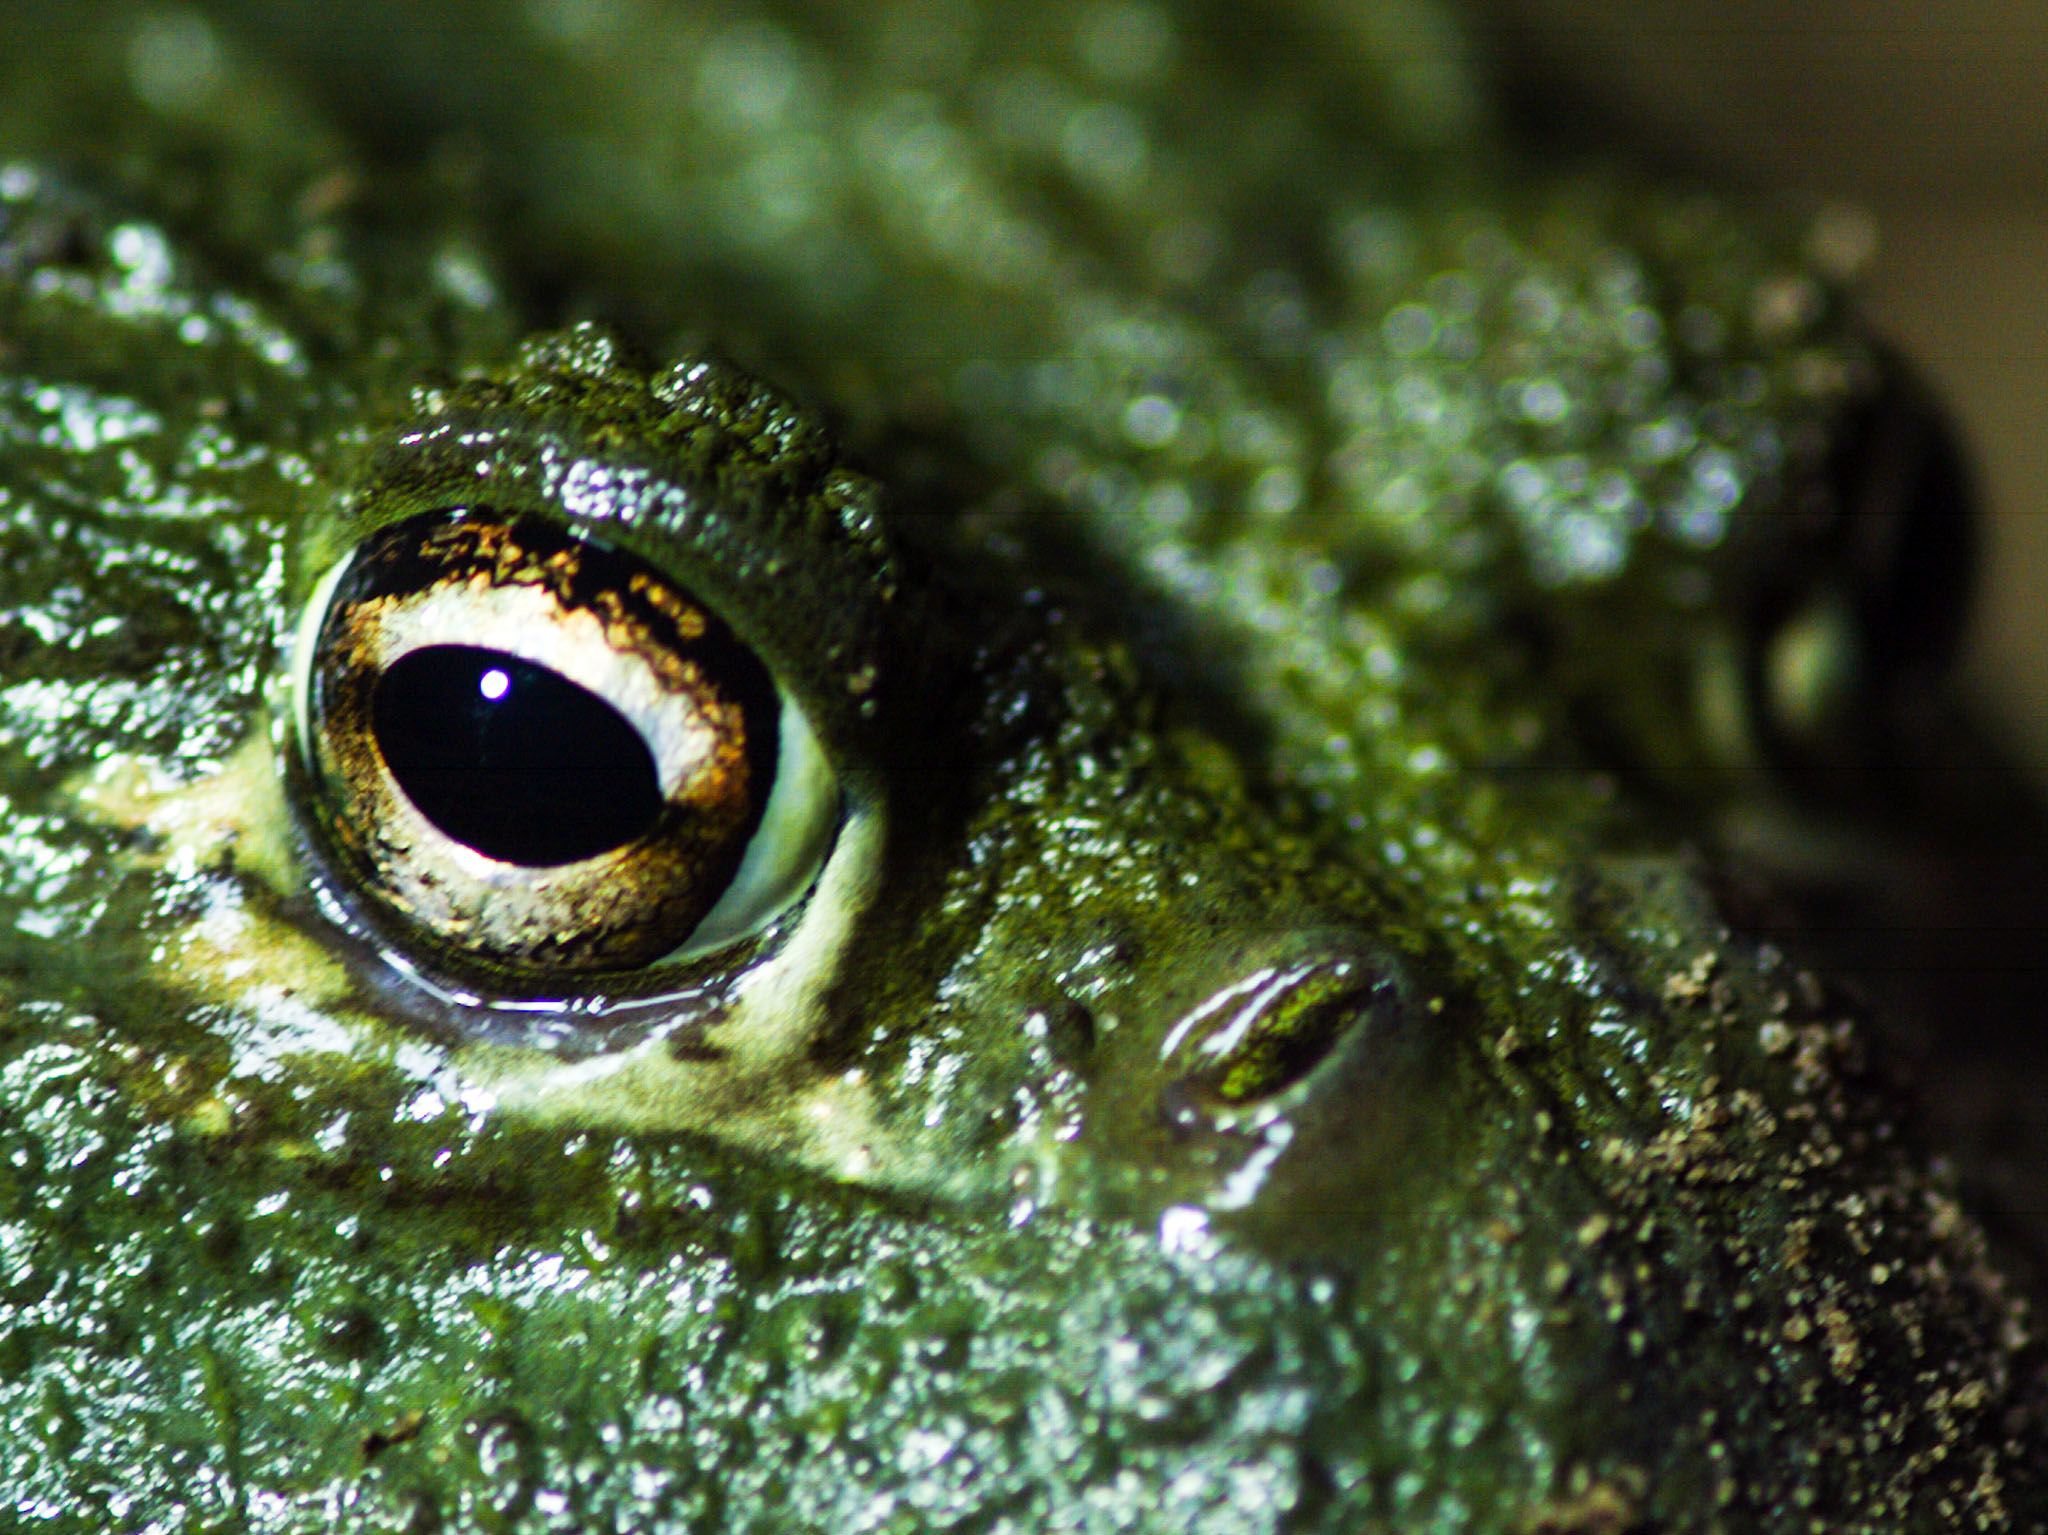 South Africa: African bullfrog (Pyxicephalus adspersus) face, revealing it's large eyes. African... [Photo of the day - July 2017]